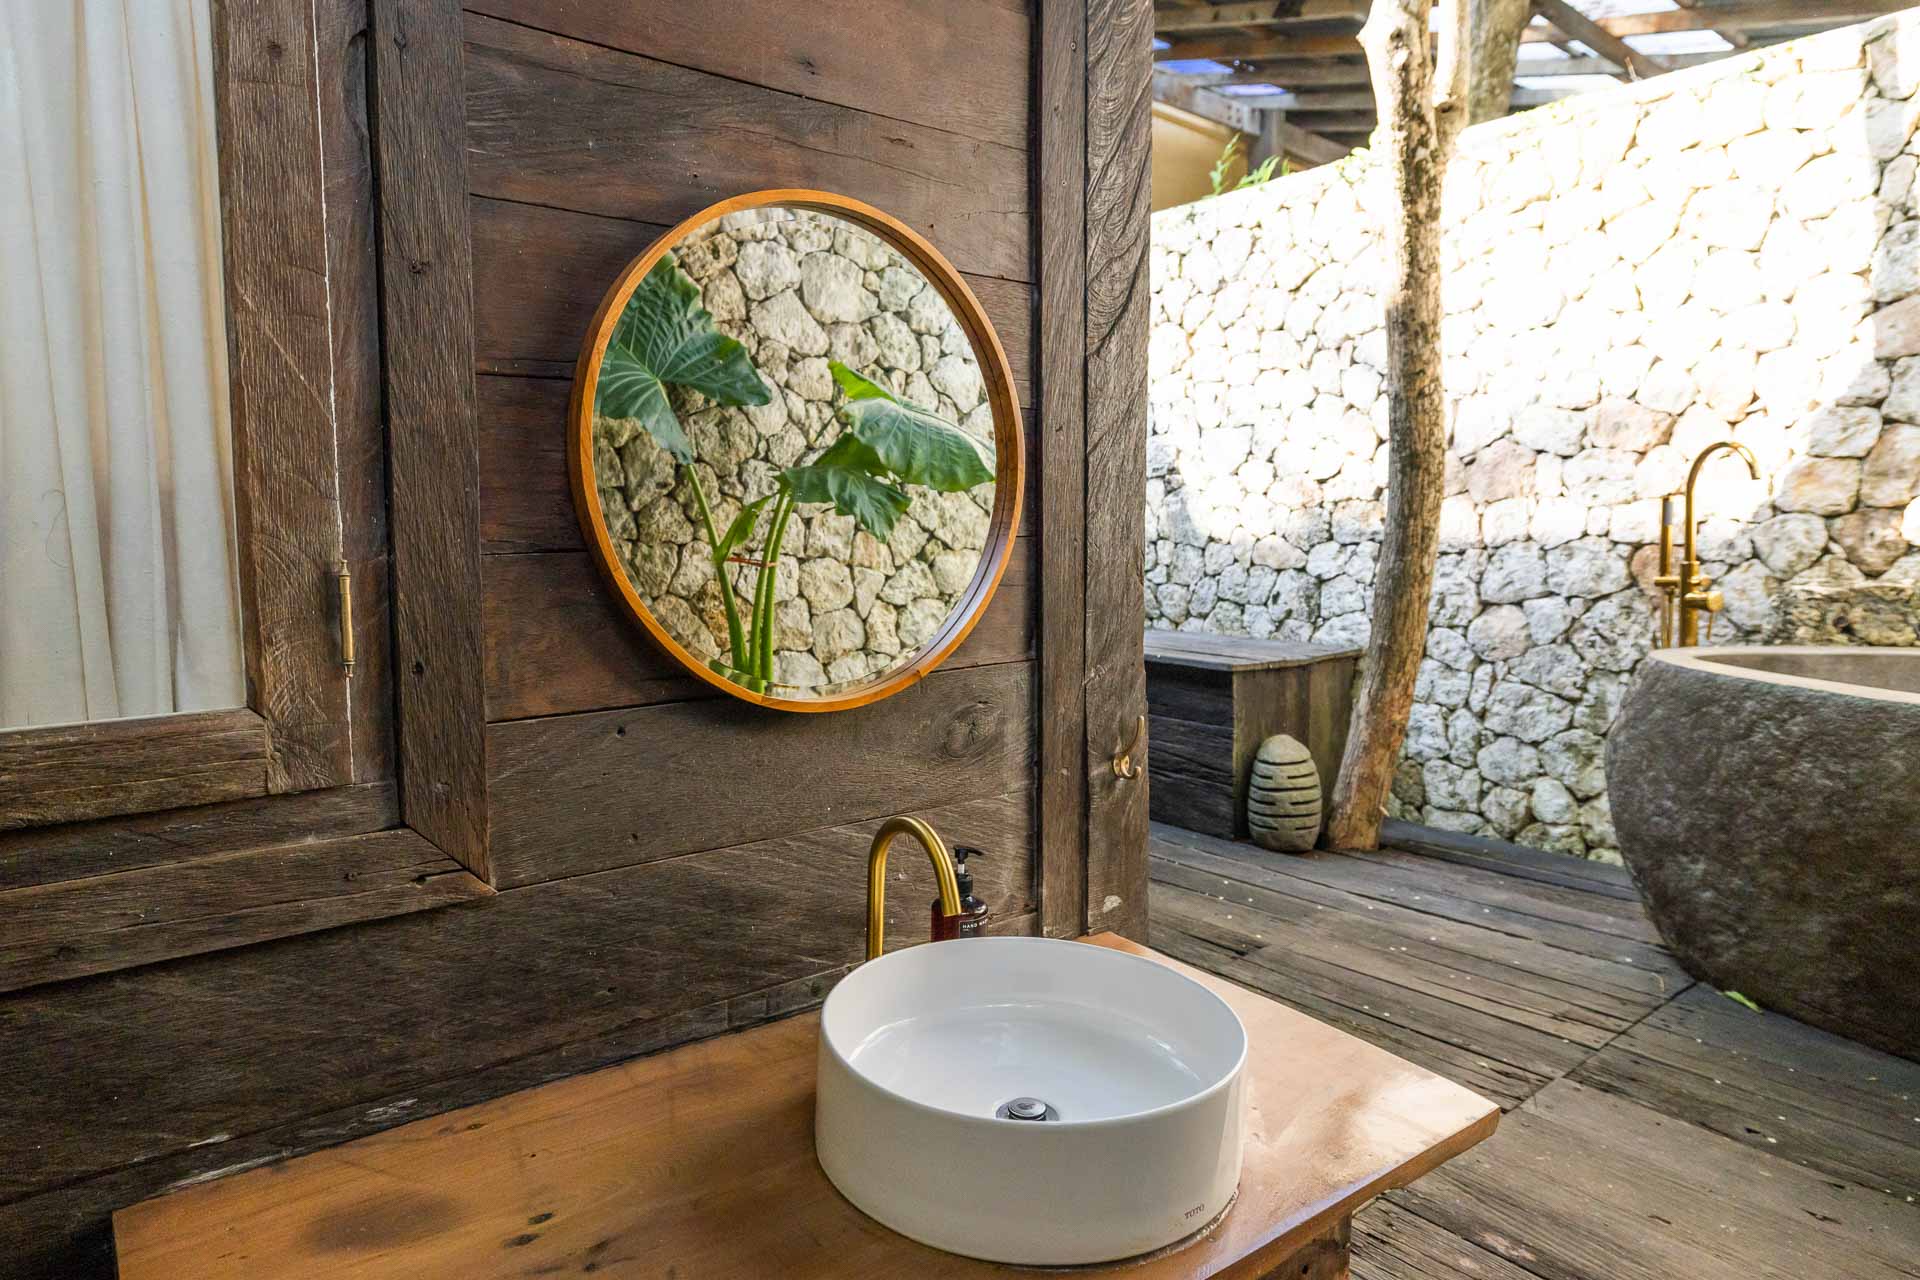 An outside bathroom decorated with earth tones and island vibes